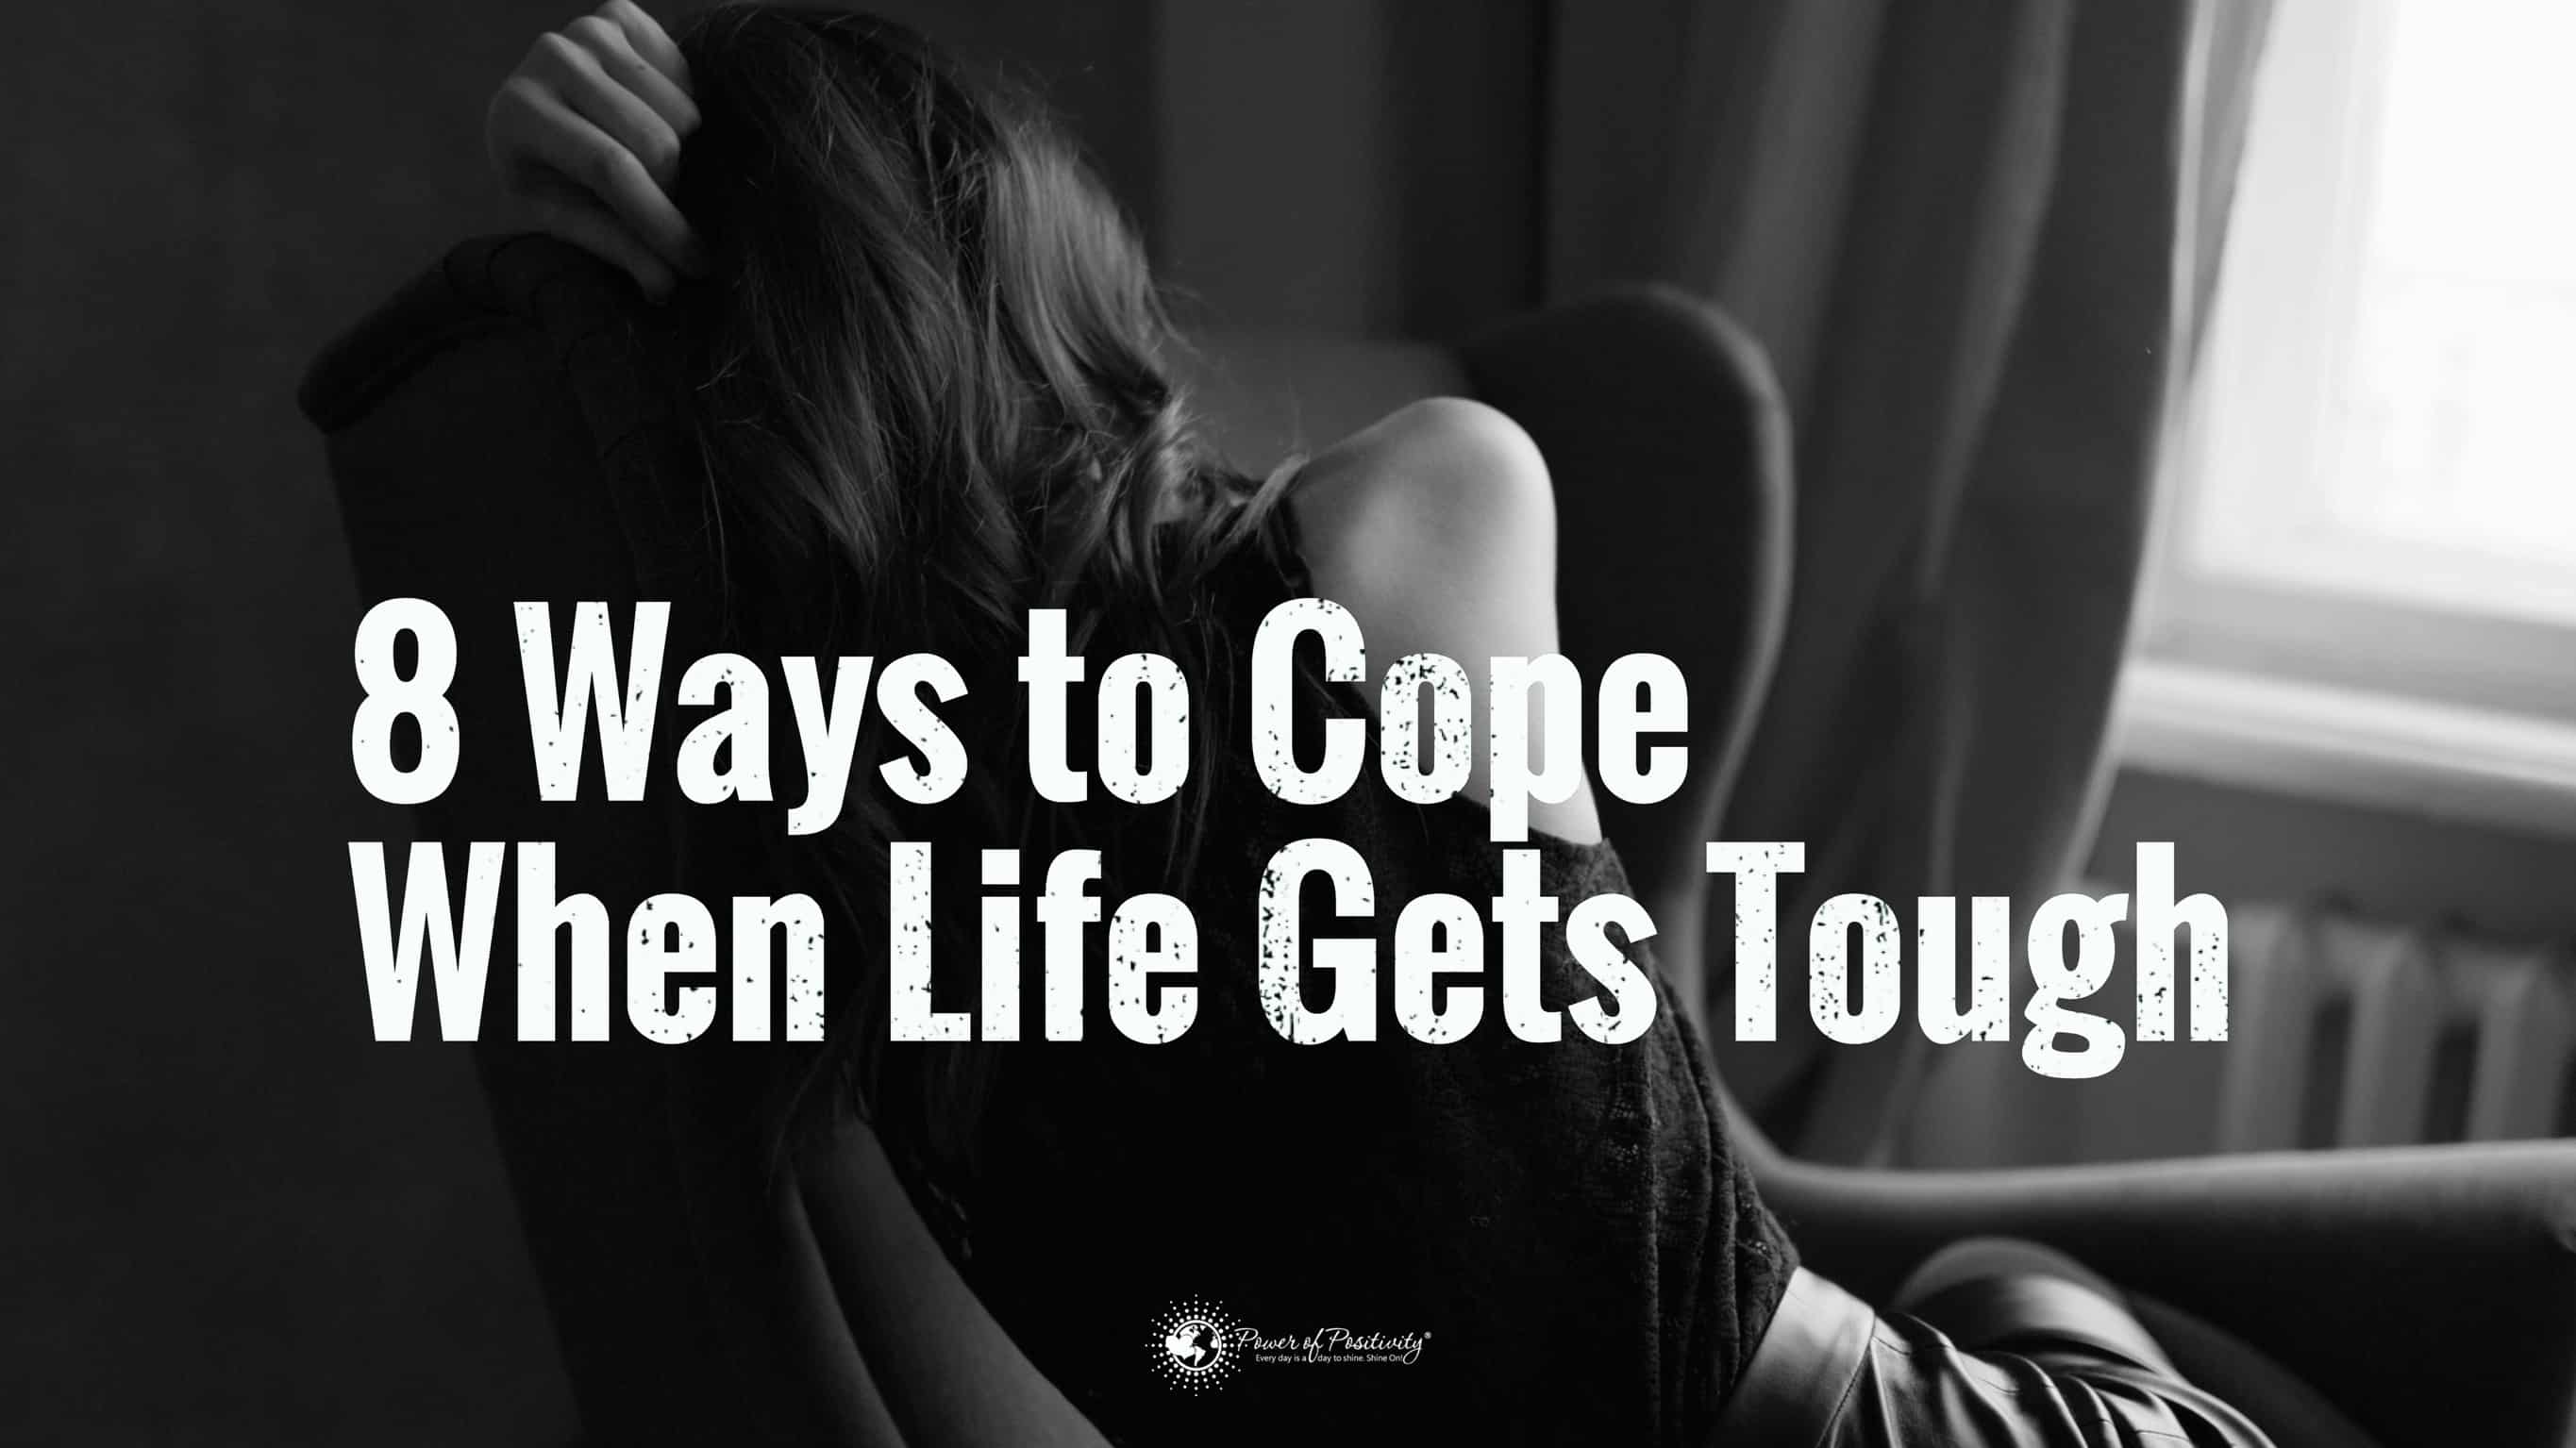 8 Positive Ways To Cope When Life Gets Tough